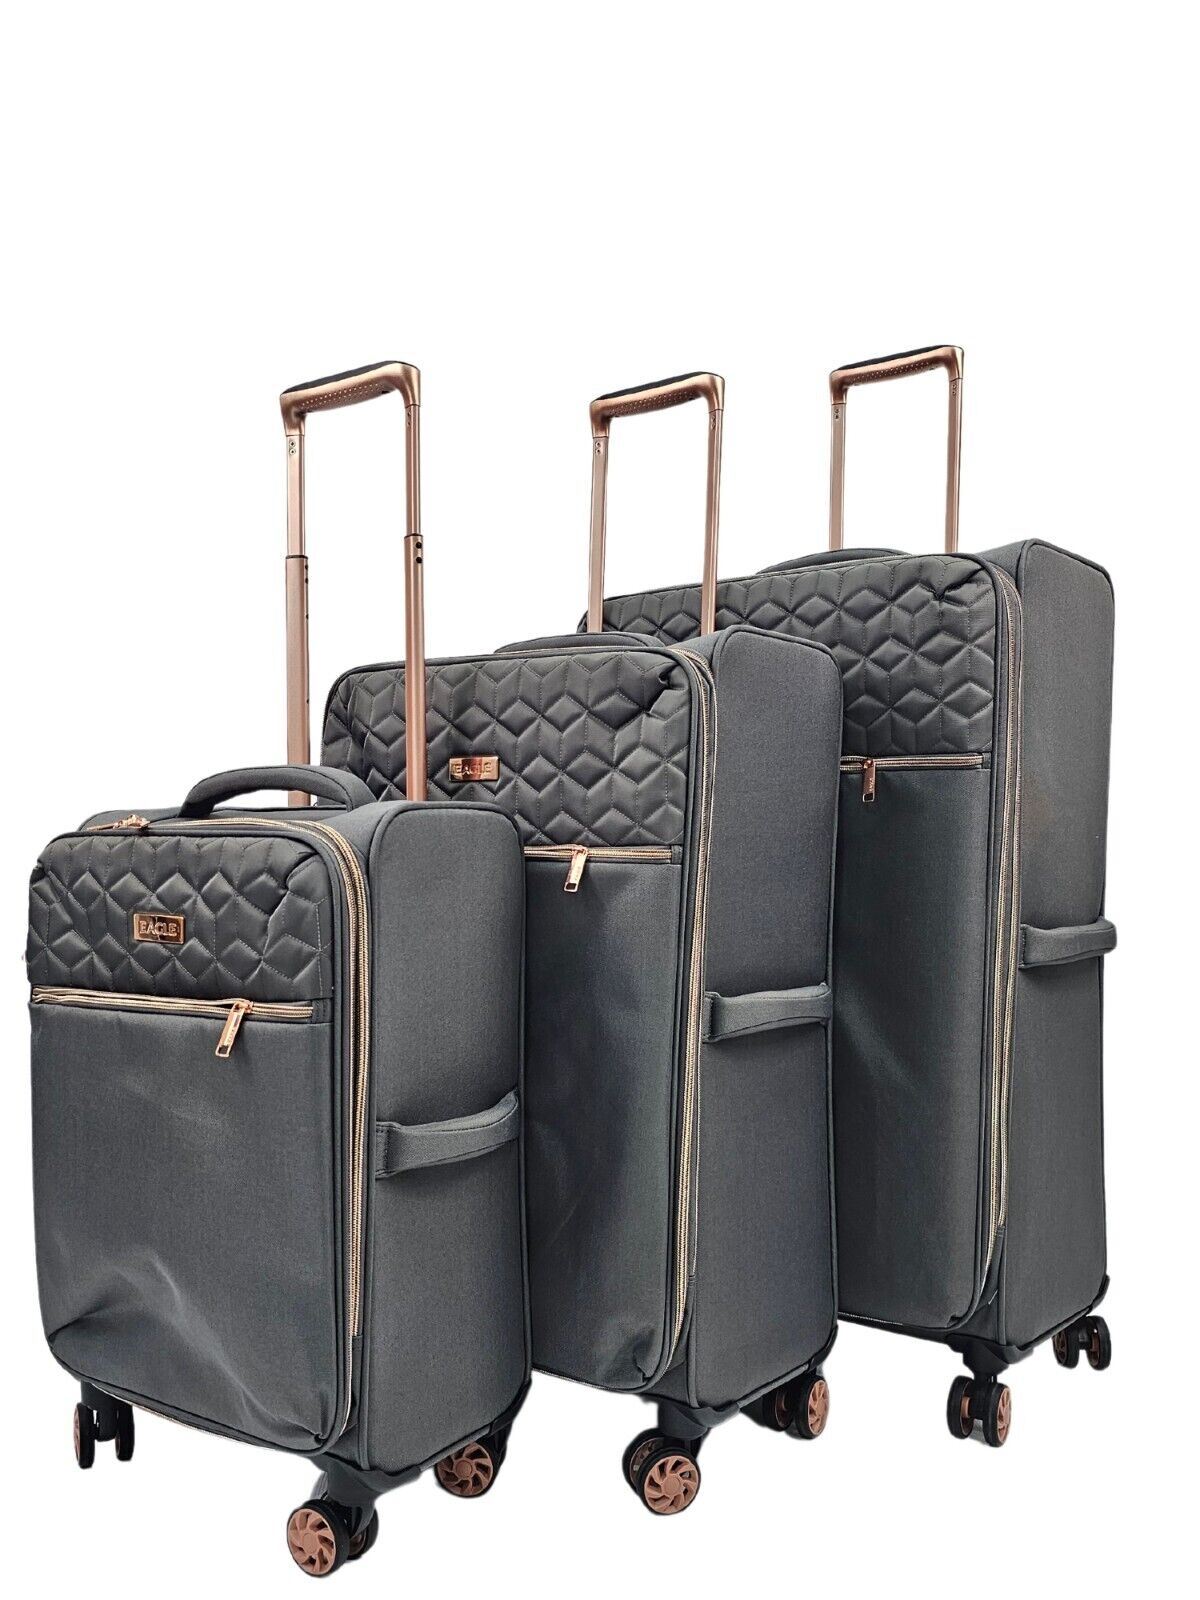 Cabin Grey Suitcases Set 4 Wheel Luggage Travel Lightweight Bags